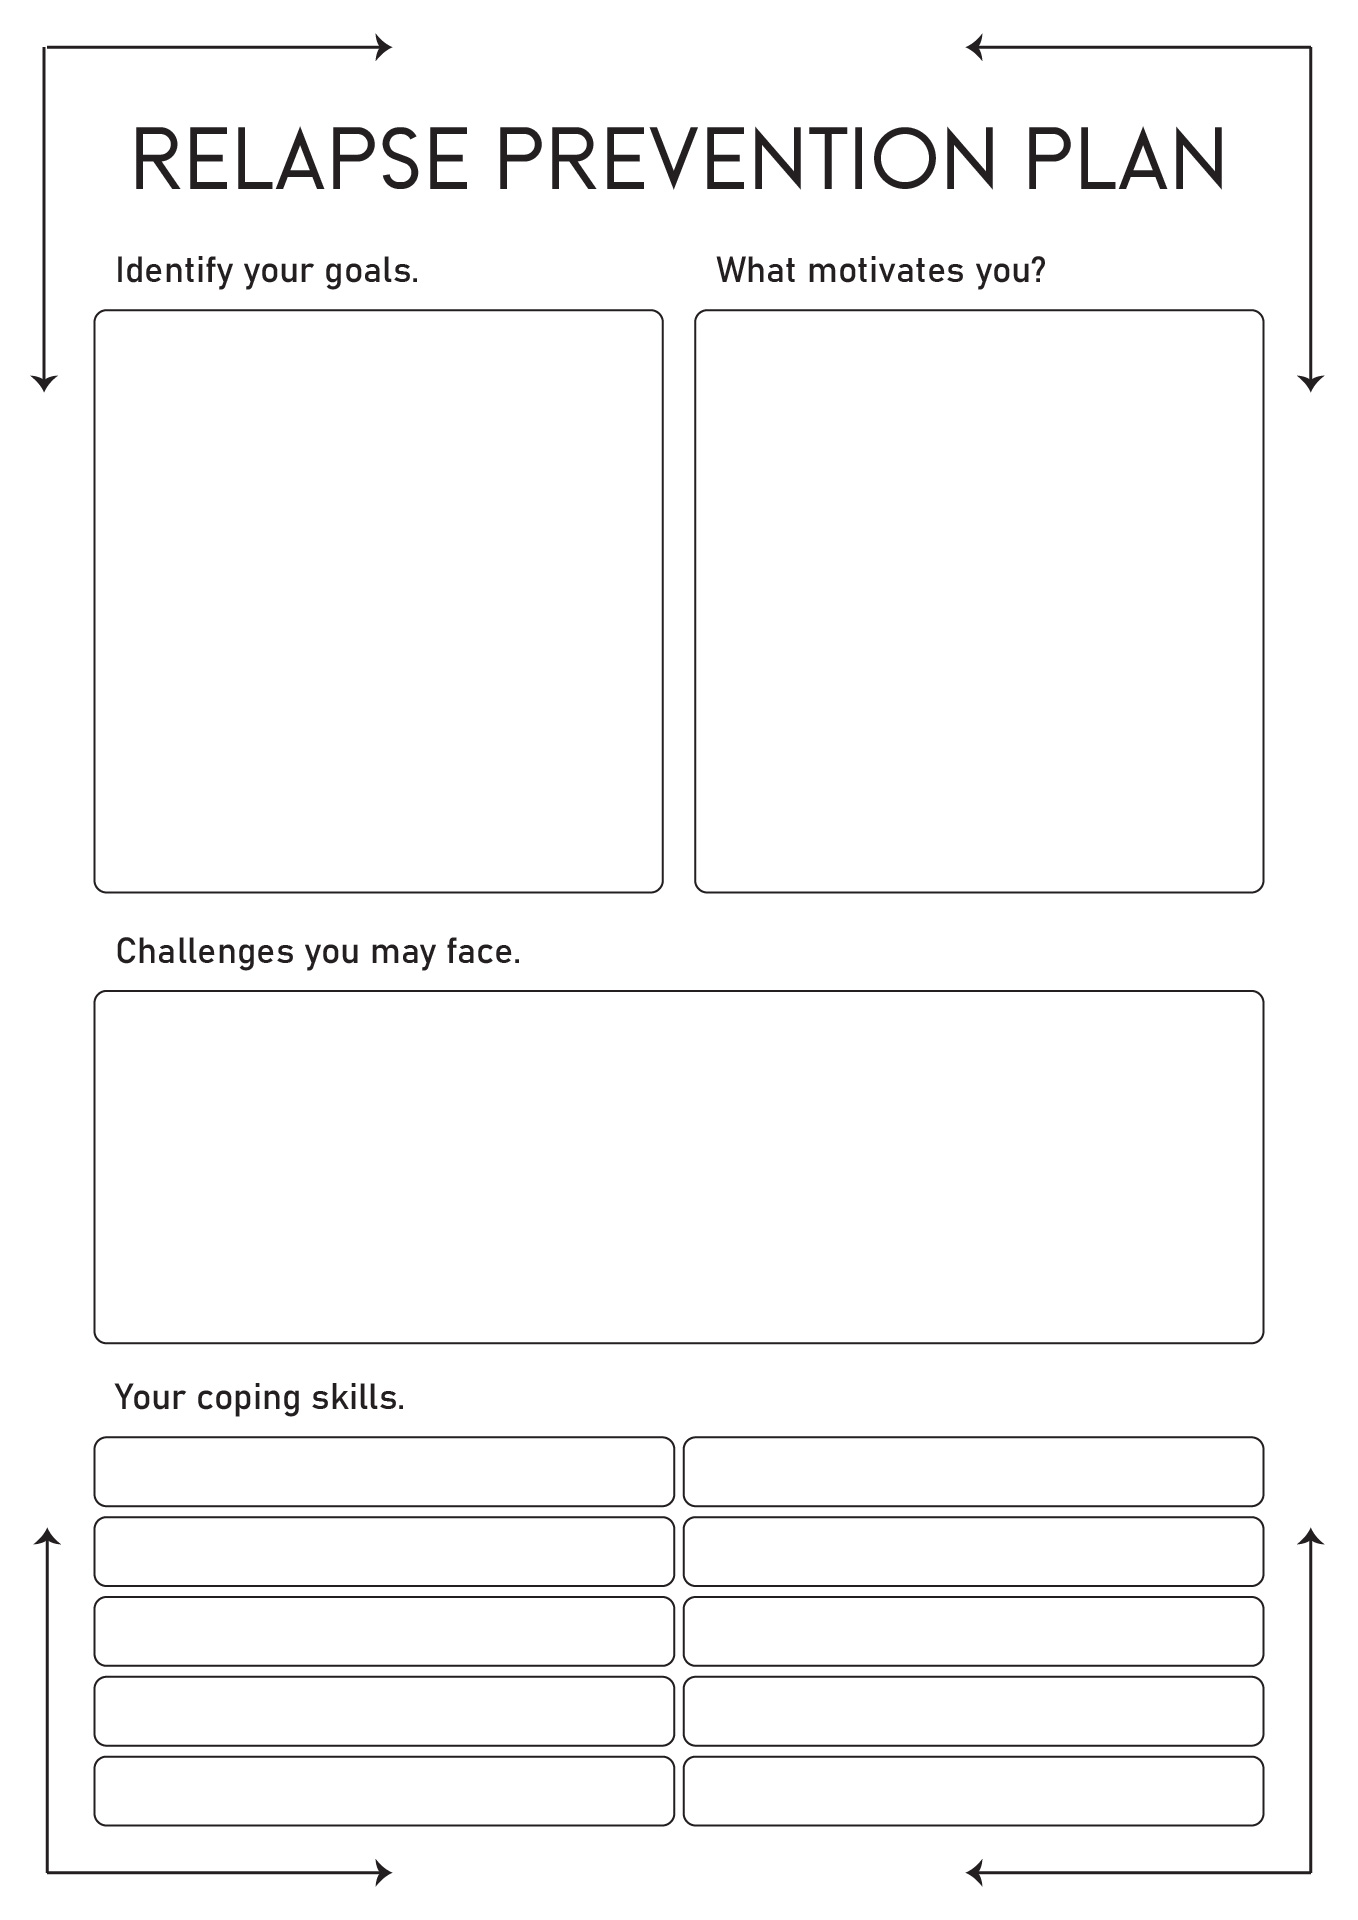 20 Best Images of For Mental Health Counseling Worksheets - Following